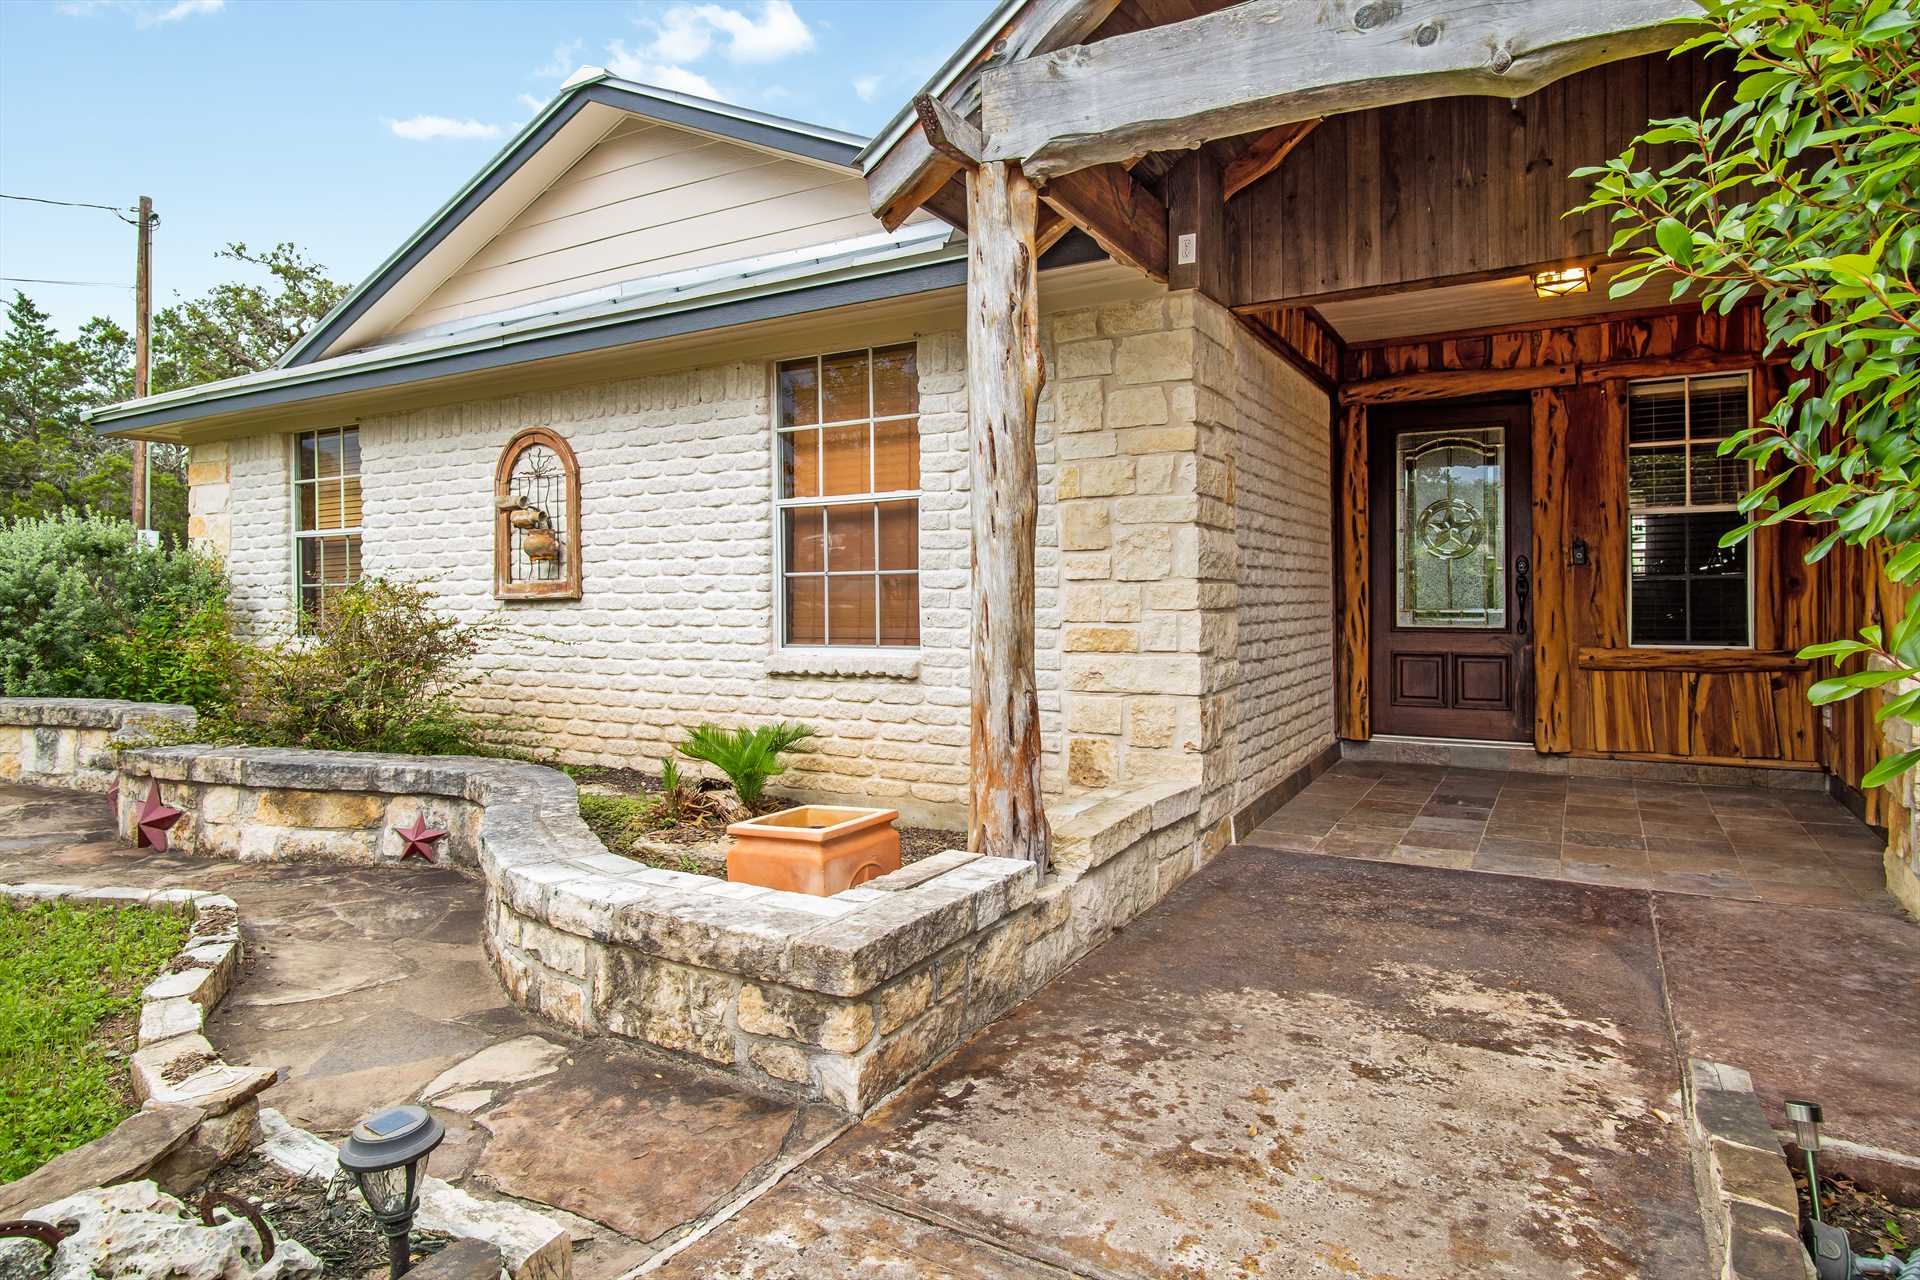                                                 Welcome to the Boerne Mountain Retreat! We're always excited to introduce this amazing place to new guests.